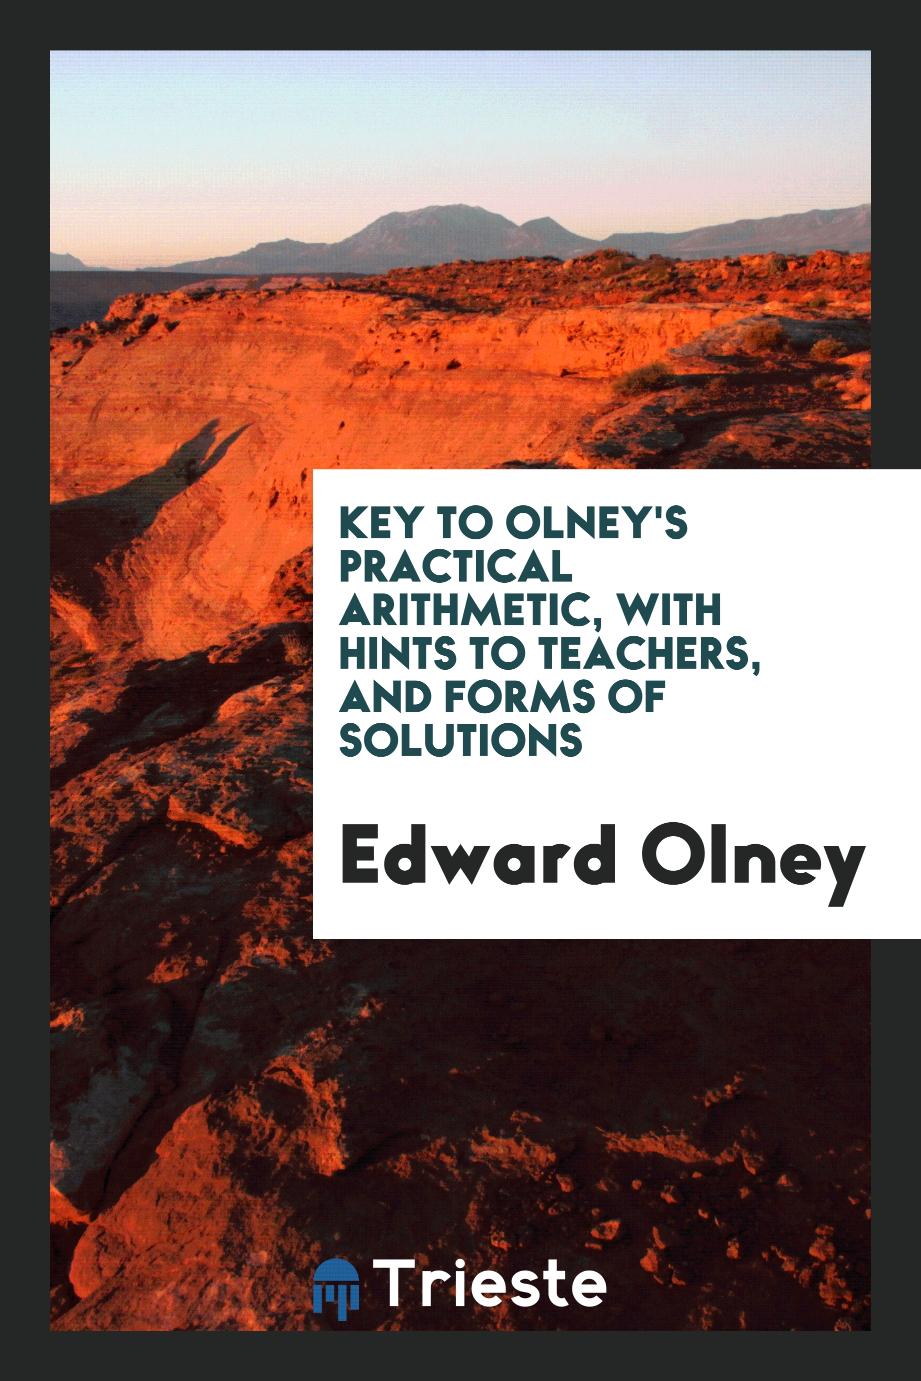 Key to Olney's Practical Arithmetic, with Hints to Teachers, and Forms of Solutions